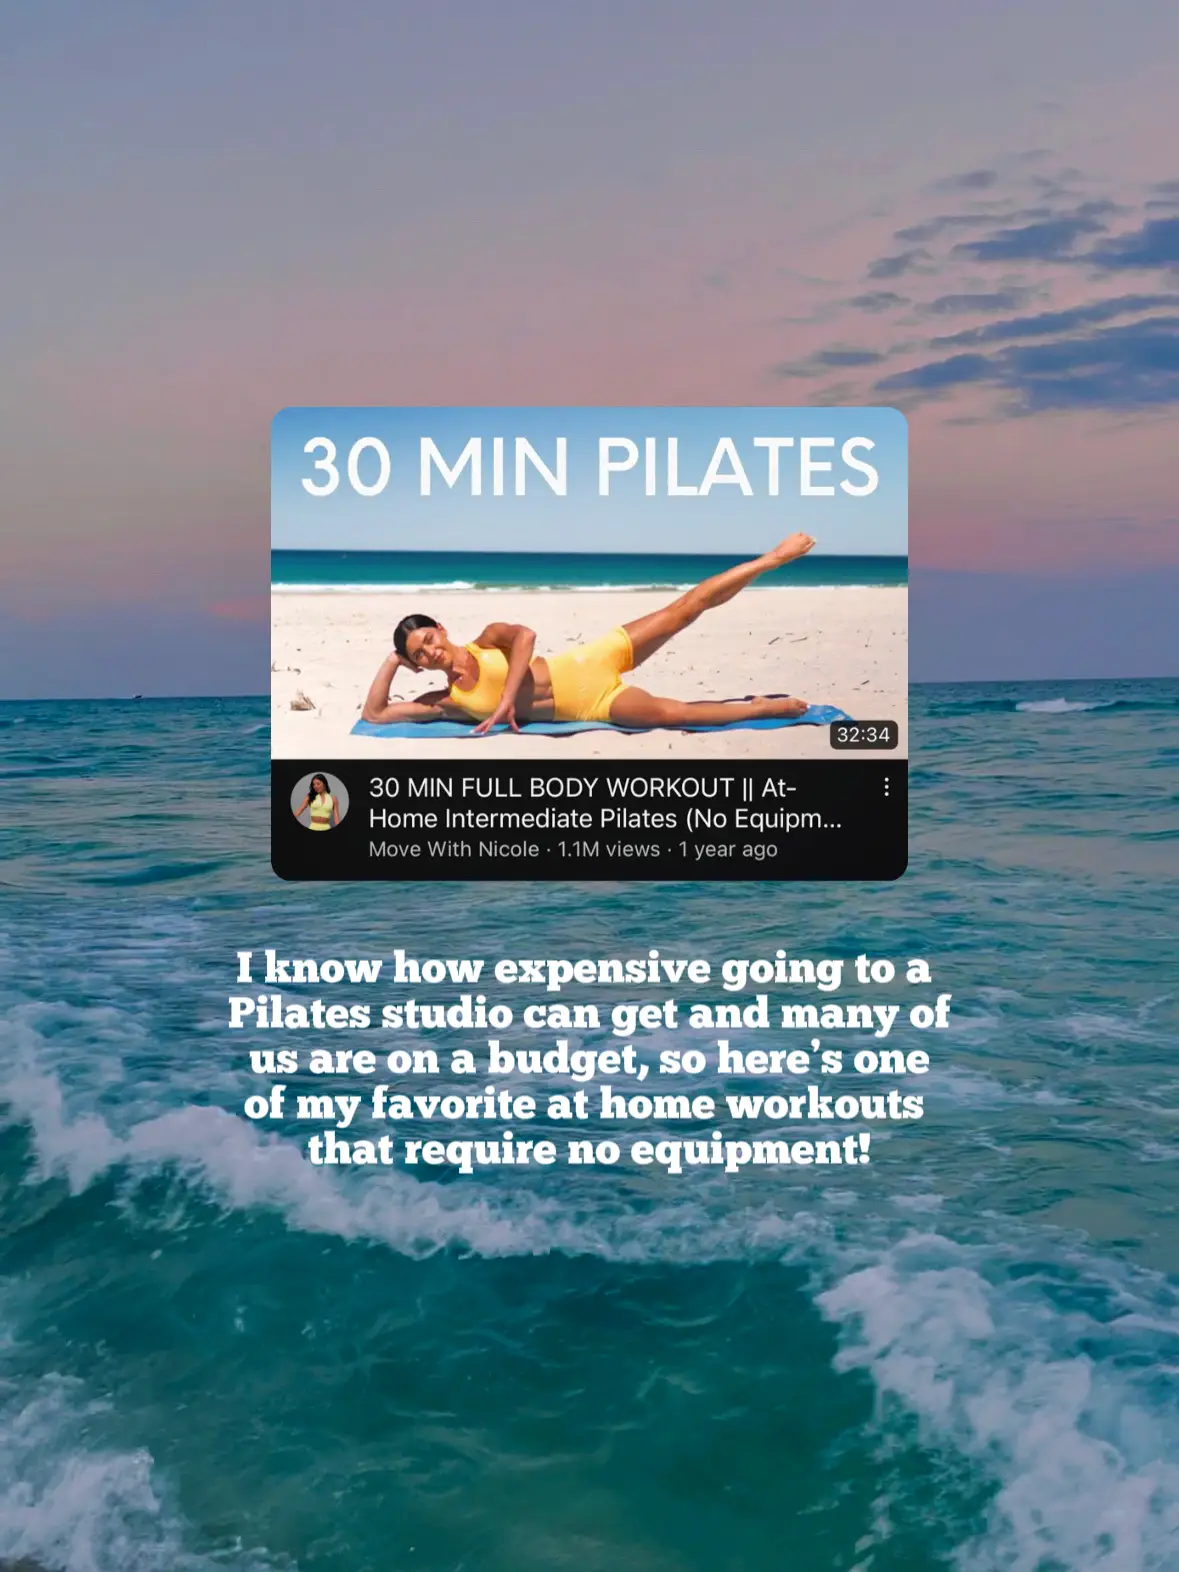 30 MIN FULL BODY PILATES WORKOUT FOR BEGINNERS (No Equipment